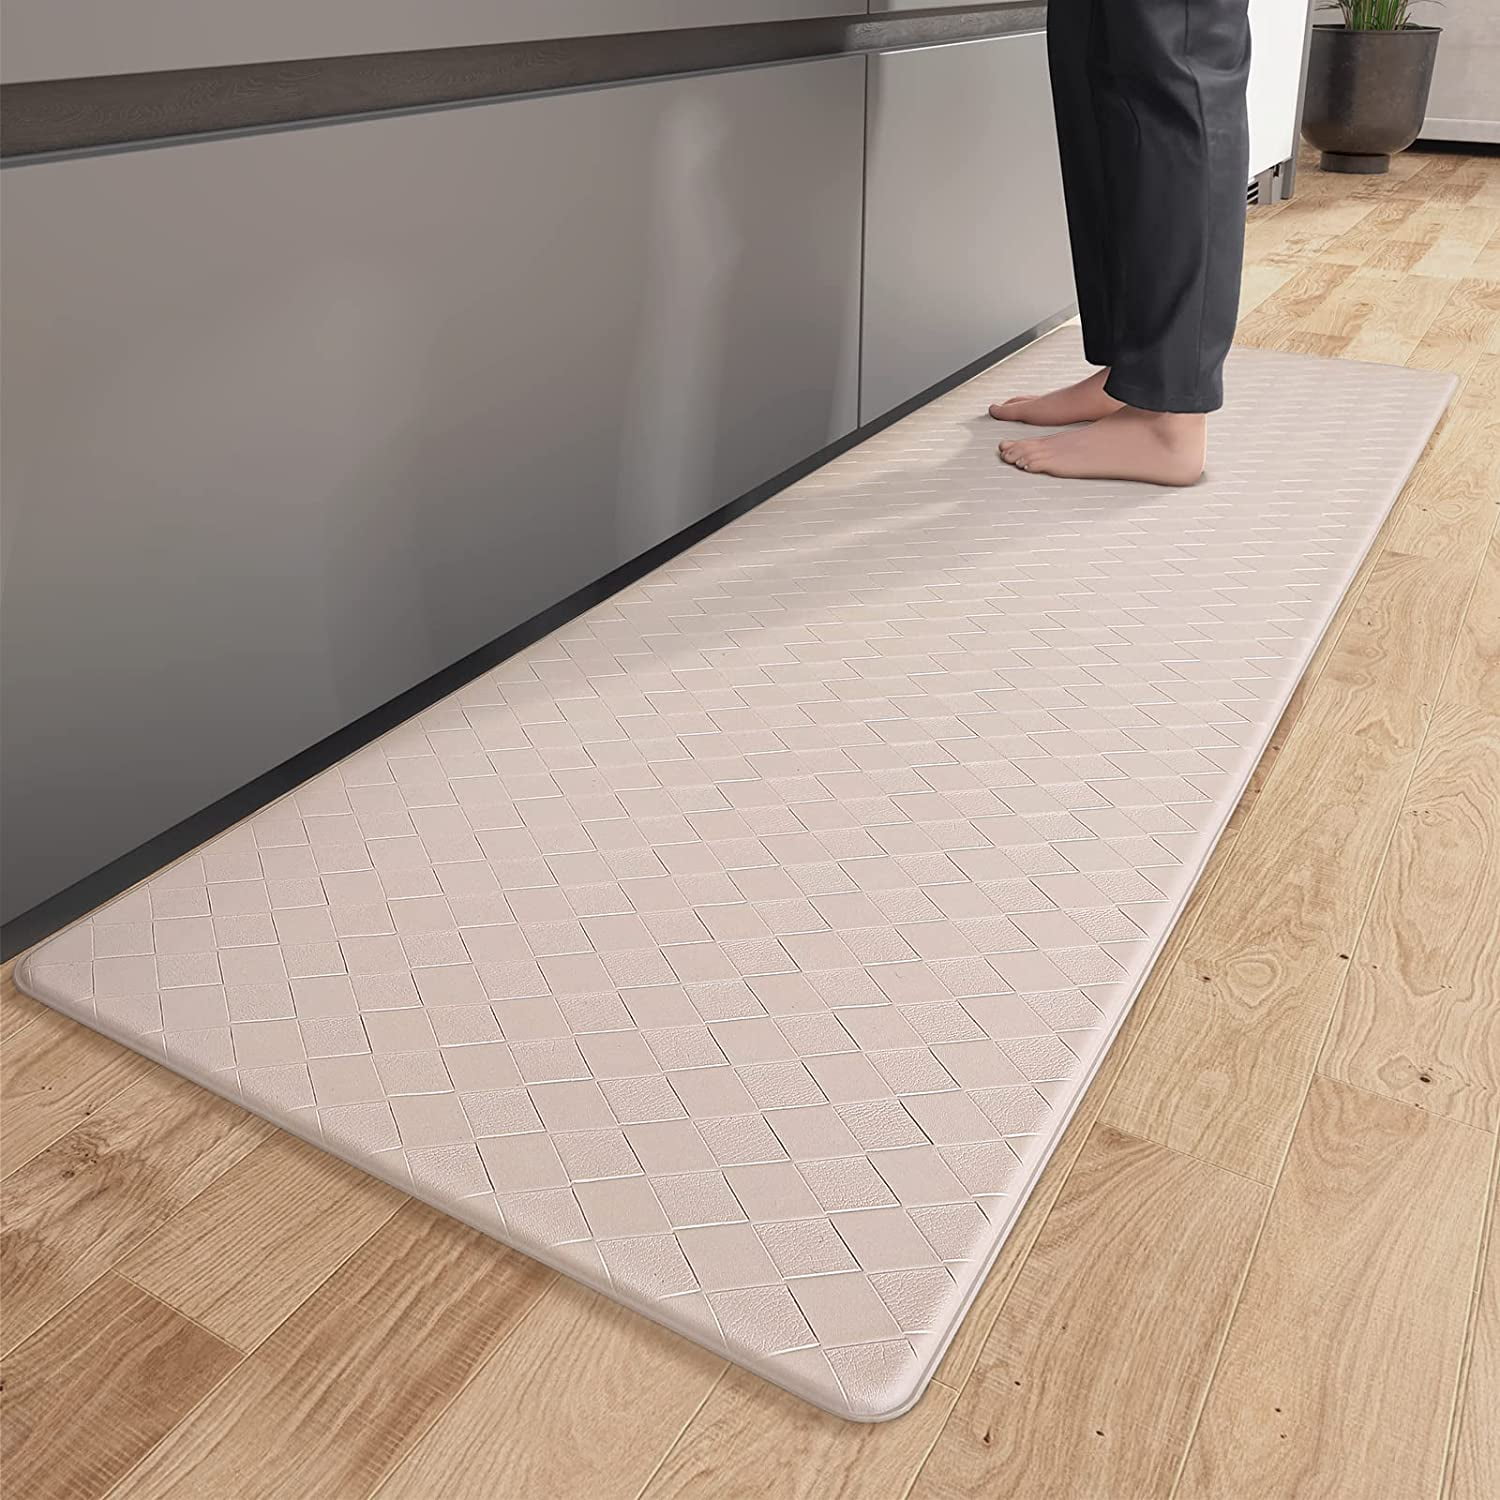 Benissimo-Modern Mats, 24”x56” Ultra-Thin (1/10 Inch) Kitchen Mat Rubber  Backing, Waterproof, Low Profile, Durable&Non Slip, Indoor Floor Mat for